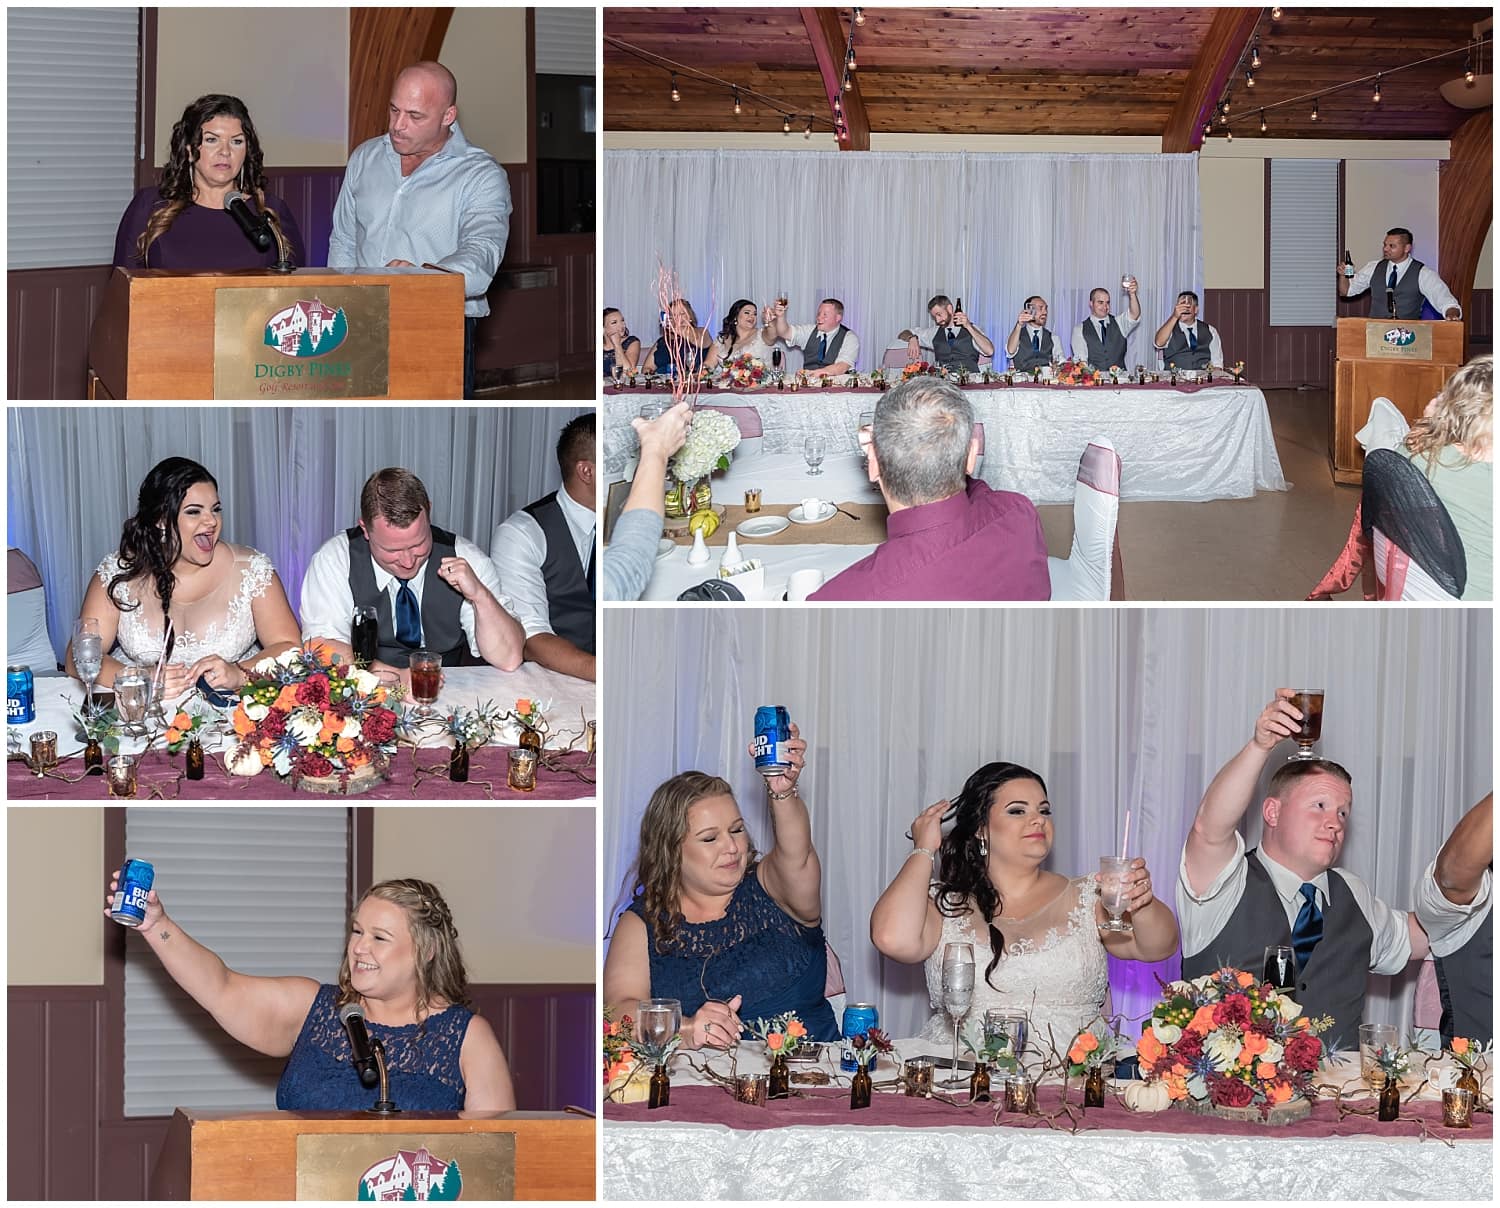 The wedding reception speeches at Digby Pines Resort Hotel in Digby Nova Scotia.